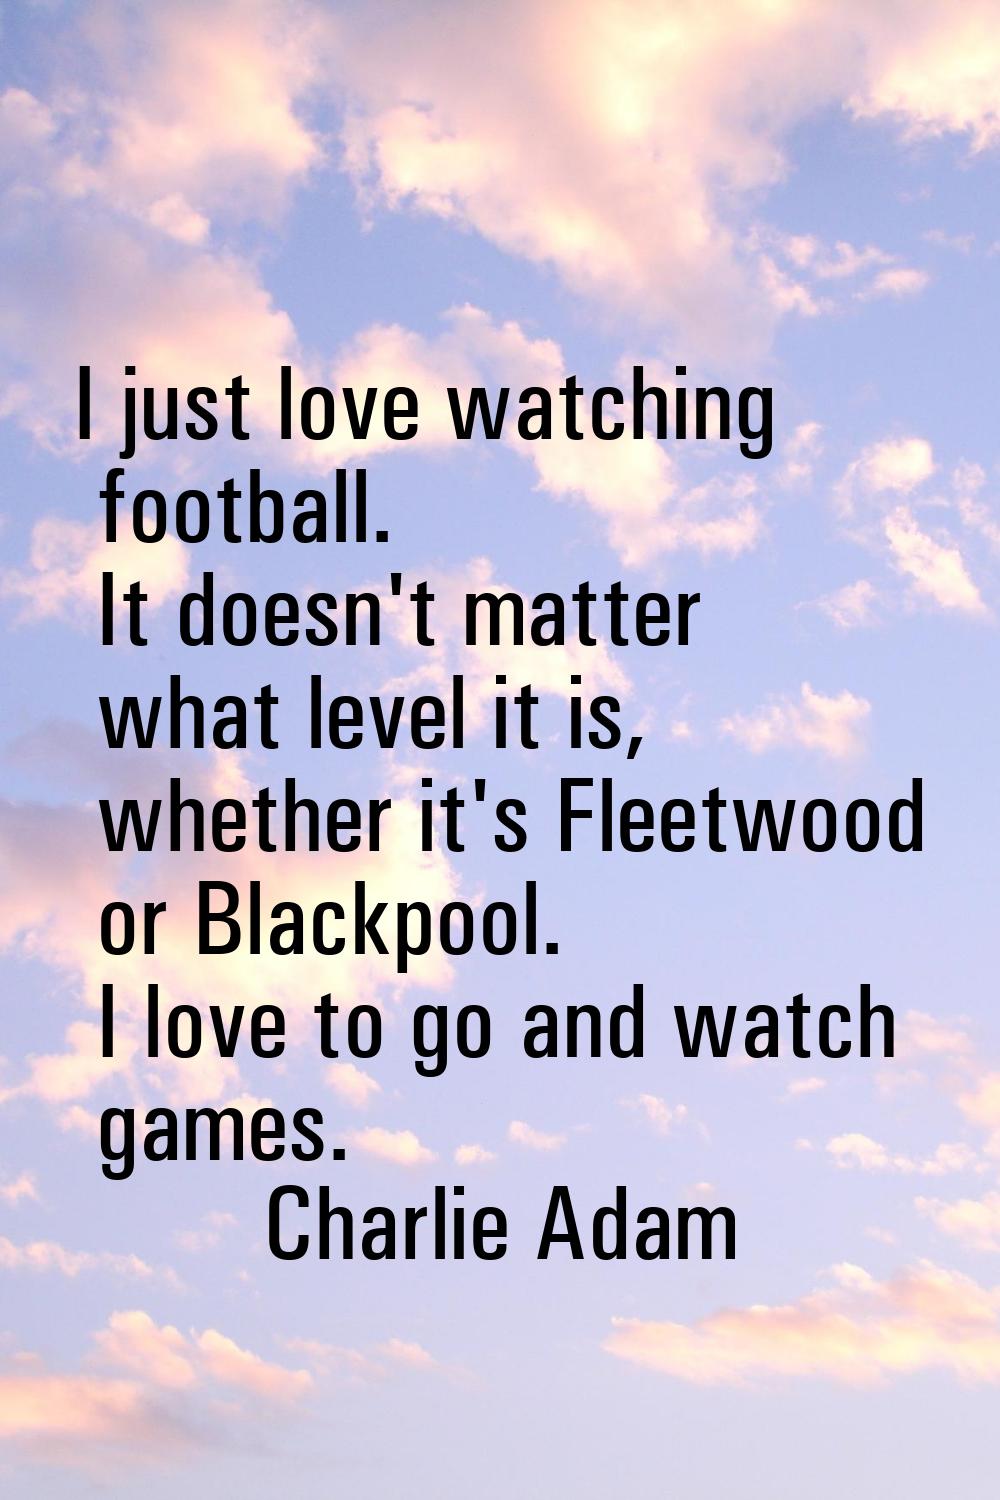 I just love watching football. It doesn't matter what level it is, whether it's Fleetwood or Blackp